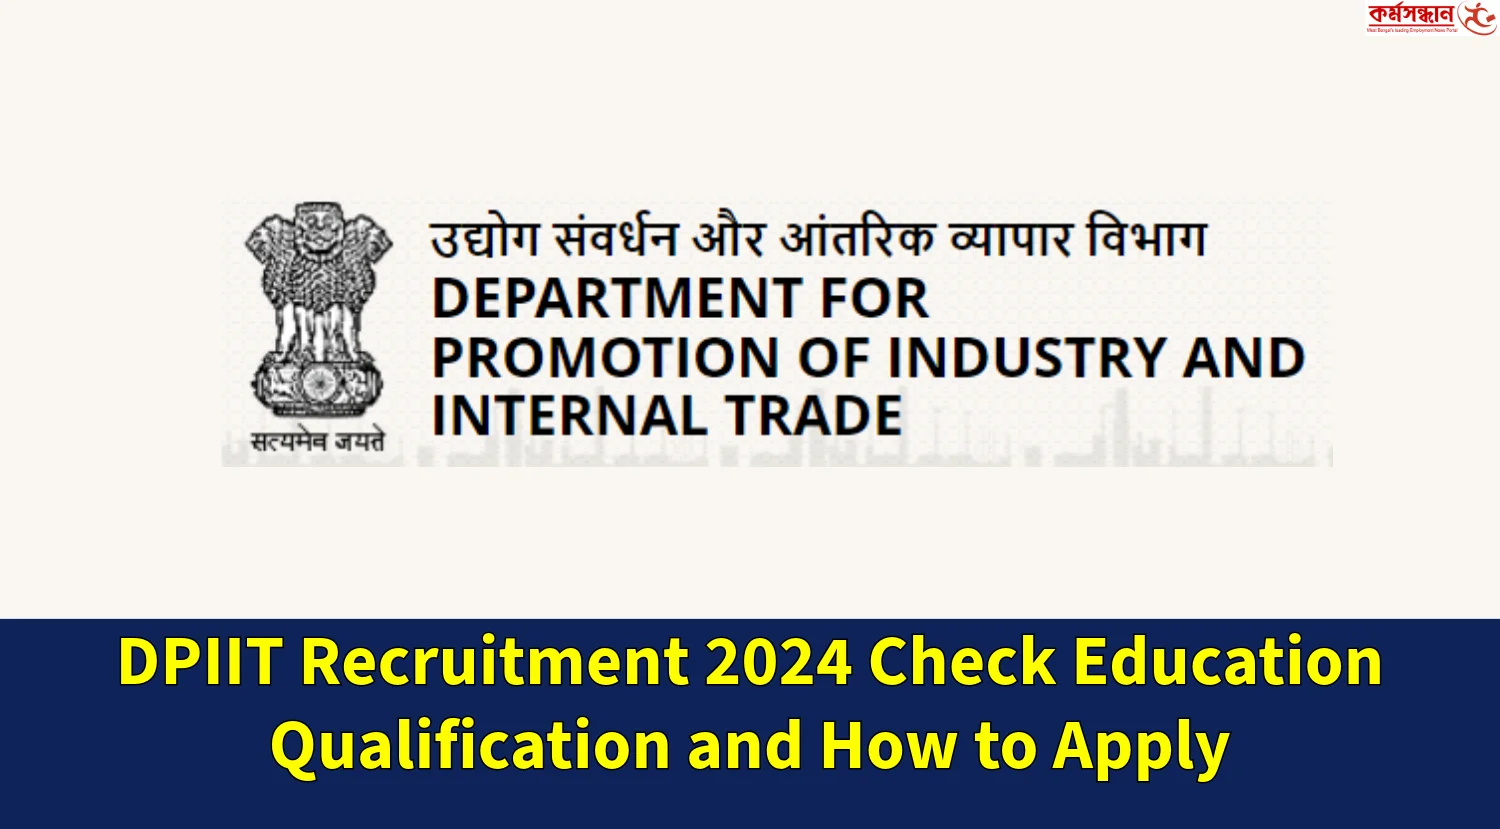 DPIIT Recruitment 2024 Check Education Qualification and How to Apply